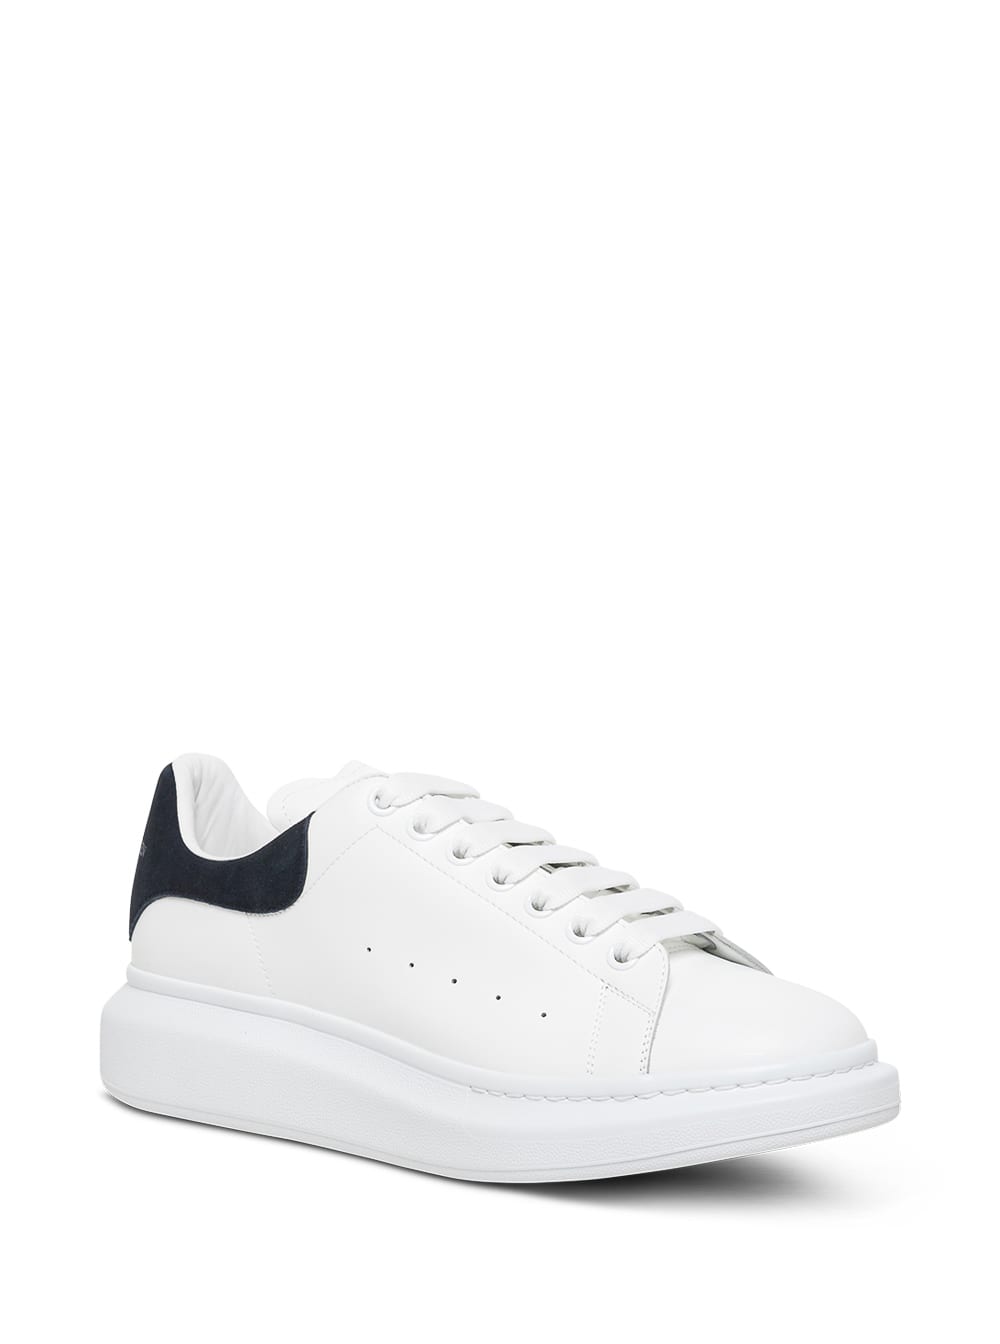 Alexander McQueen Big Sole White Leather Sneakers With Suedeheel Tab